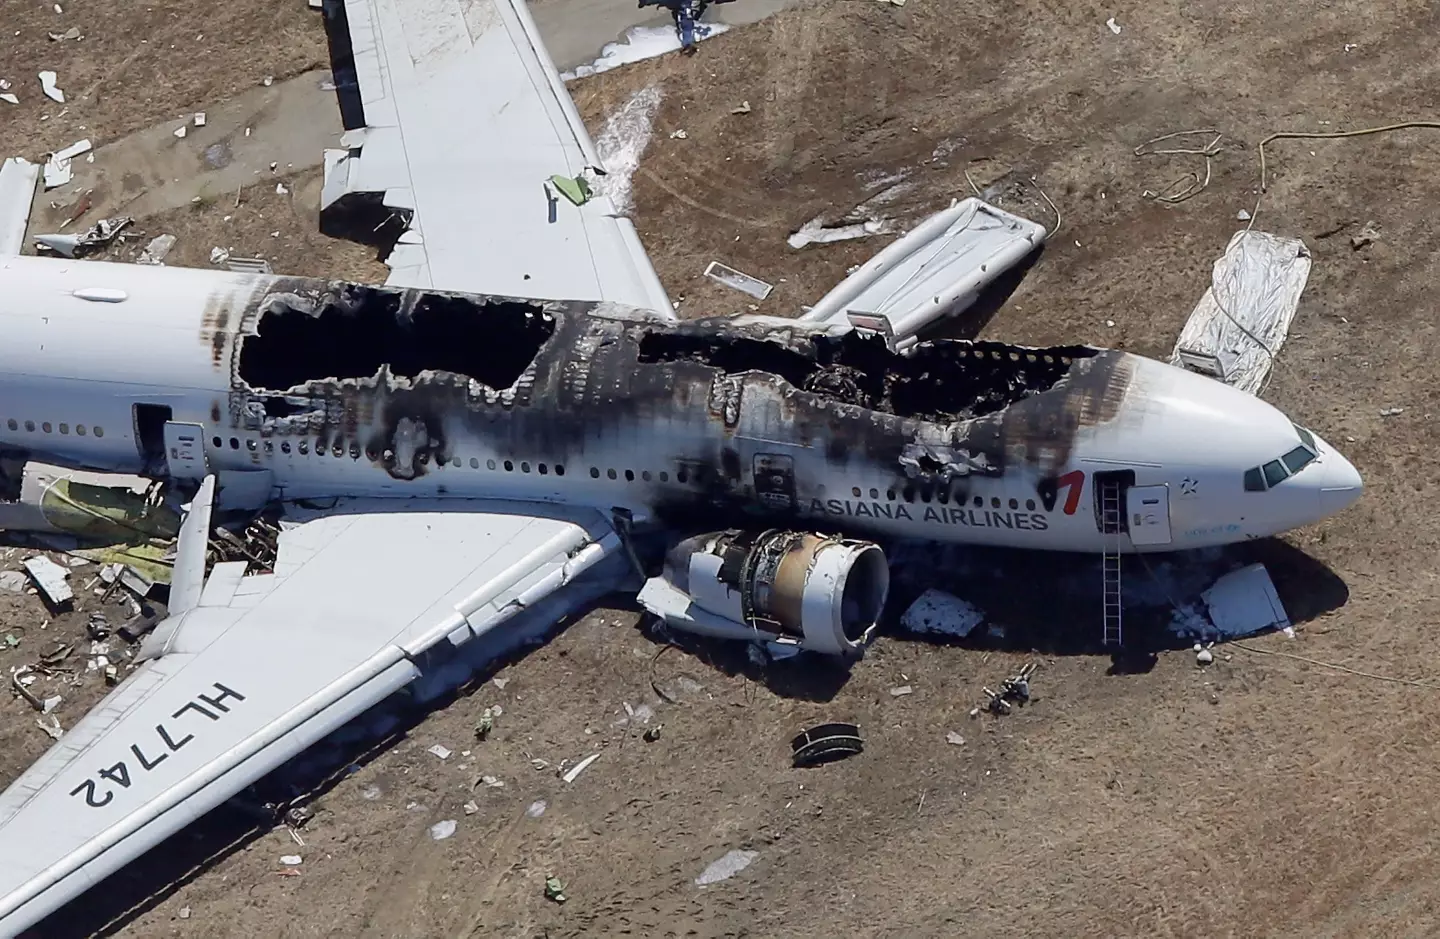 This image of a Boeing 777 which crash landed in 2013 was sent to passengers on the plane.